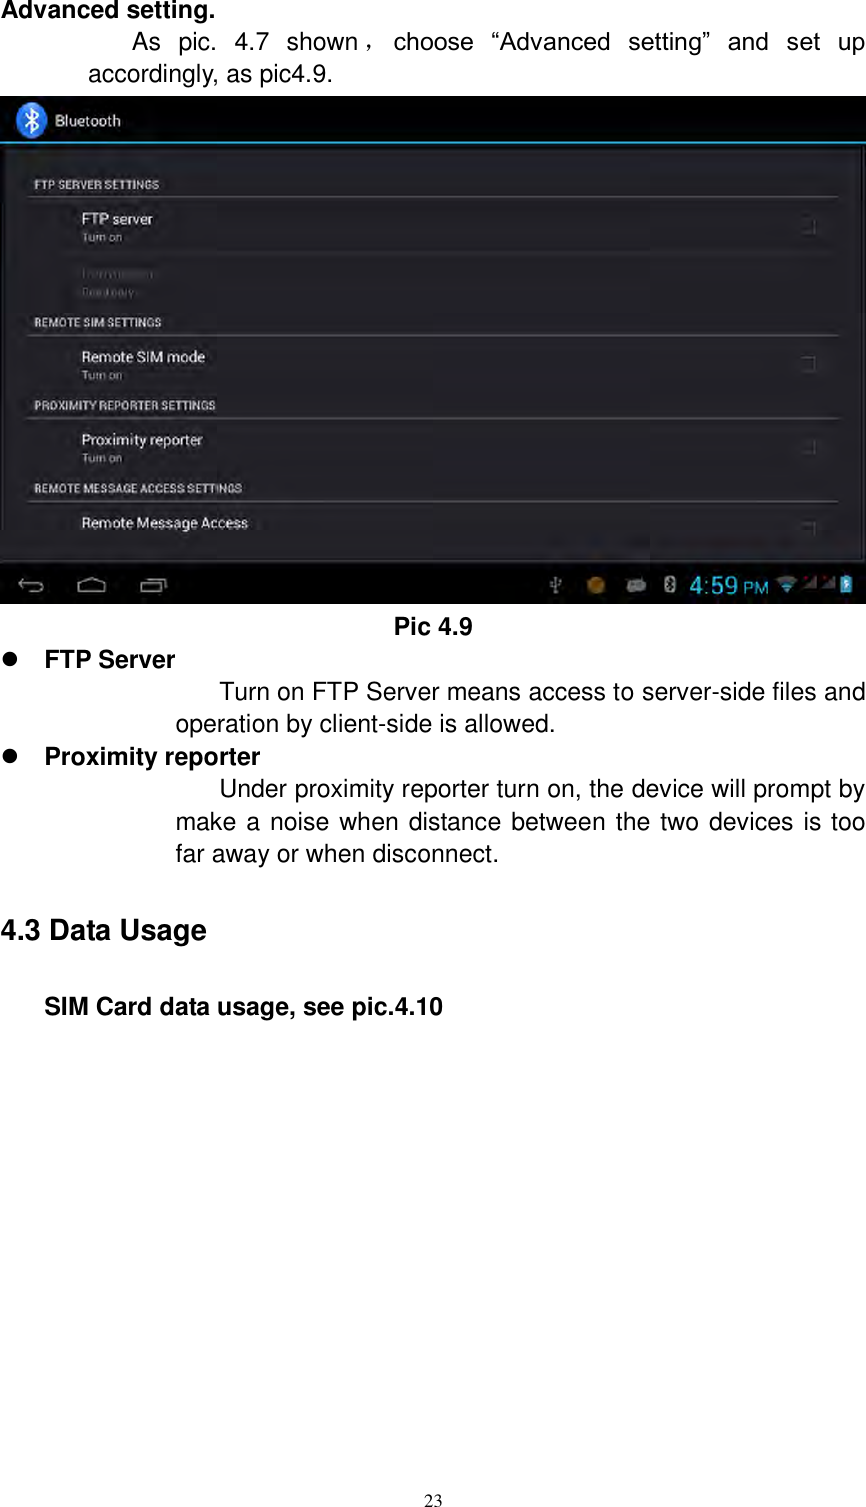      23 Advanced setting. As  pic.  4.7  shown ，choose  “Advanced  setting”  and  set  up accordingly, as pic4.9.  Pic 4.9  FTP Server Turn on FTP Server means access to server-side files and operation by client-side is allowed.  Proximity reporter Under proximity reporter turn on, the device will prompt by make a noise when distance between the two devices is too far away or when disconnect. 4.3 Data Usage     SIM Card data usage, see pic.4.10 